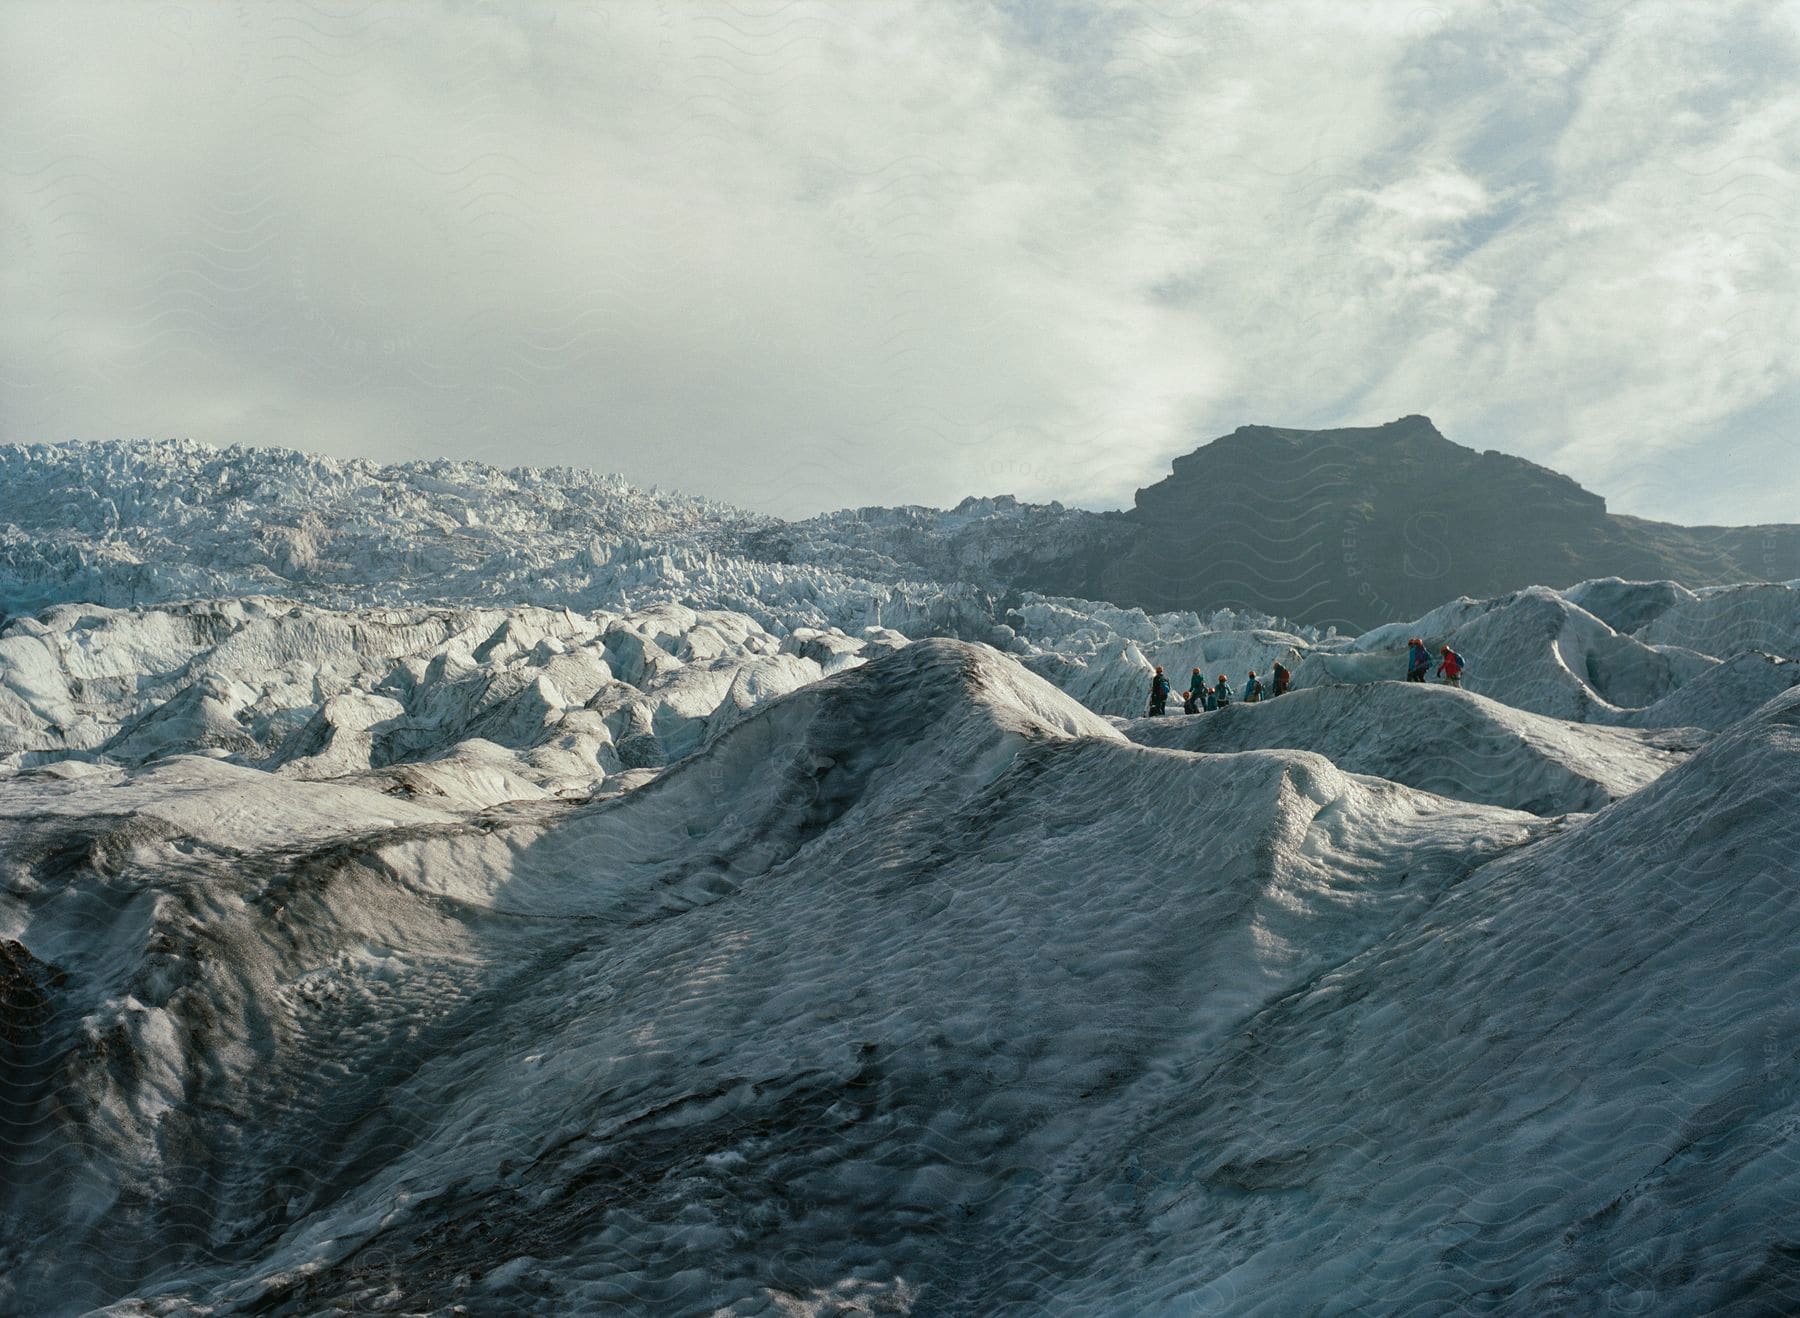 A group of eight people crossing a frozen landscape in iceland